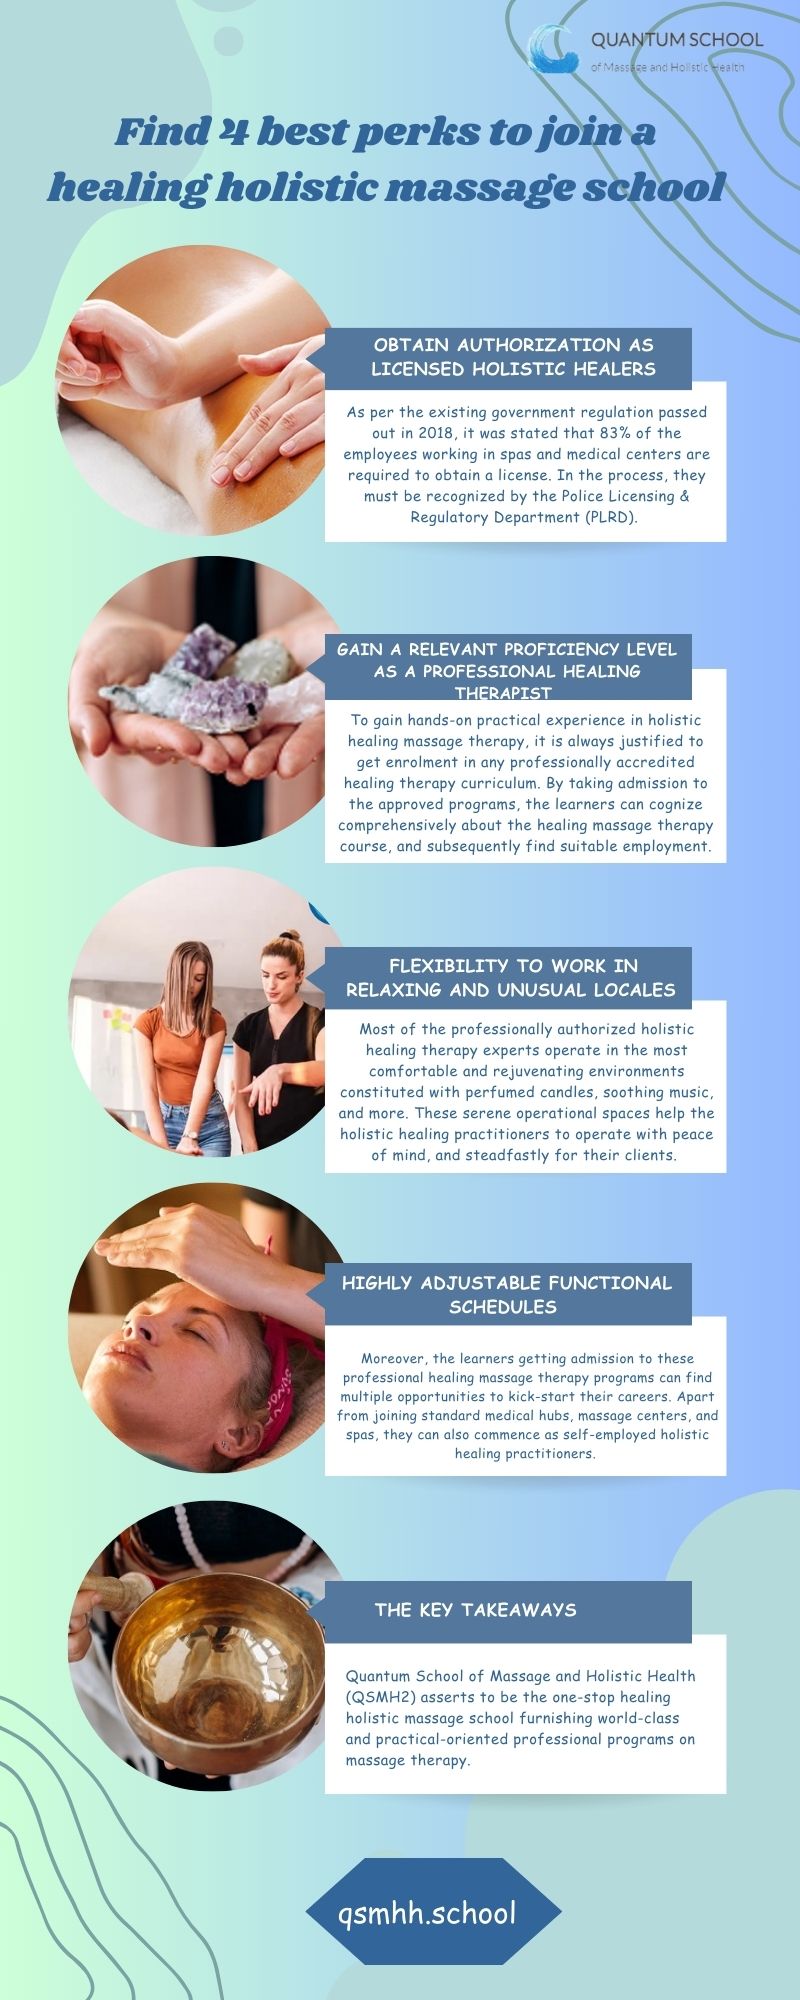 Find 4 best perks to join a healing holistic massage school.jpg QSMH2, the leading healing holistic massage school comes with professionally certified courses in HHP and LMT helping aspiring healers to gain hands-on expertise. For more details, visit: https://qsmhh.school/ by Quantumschool